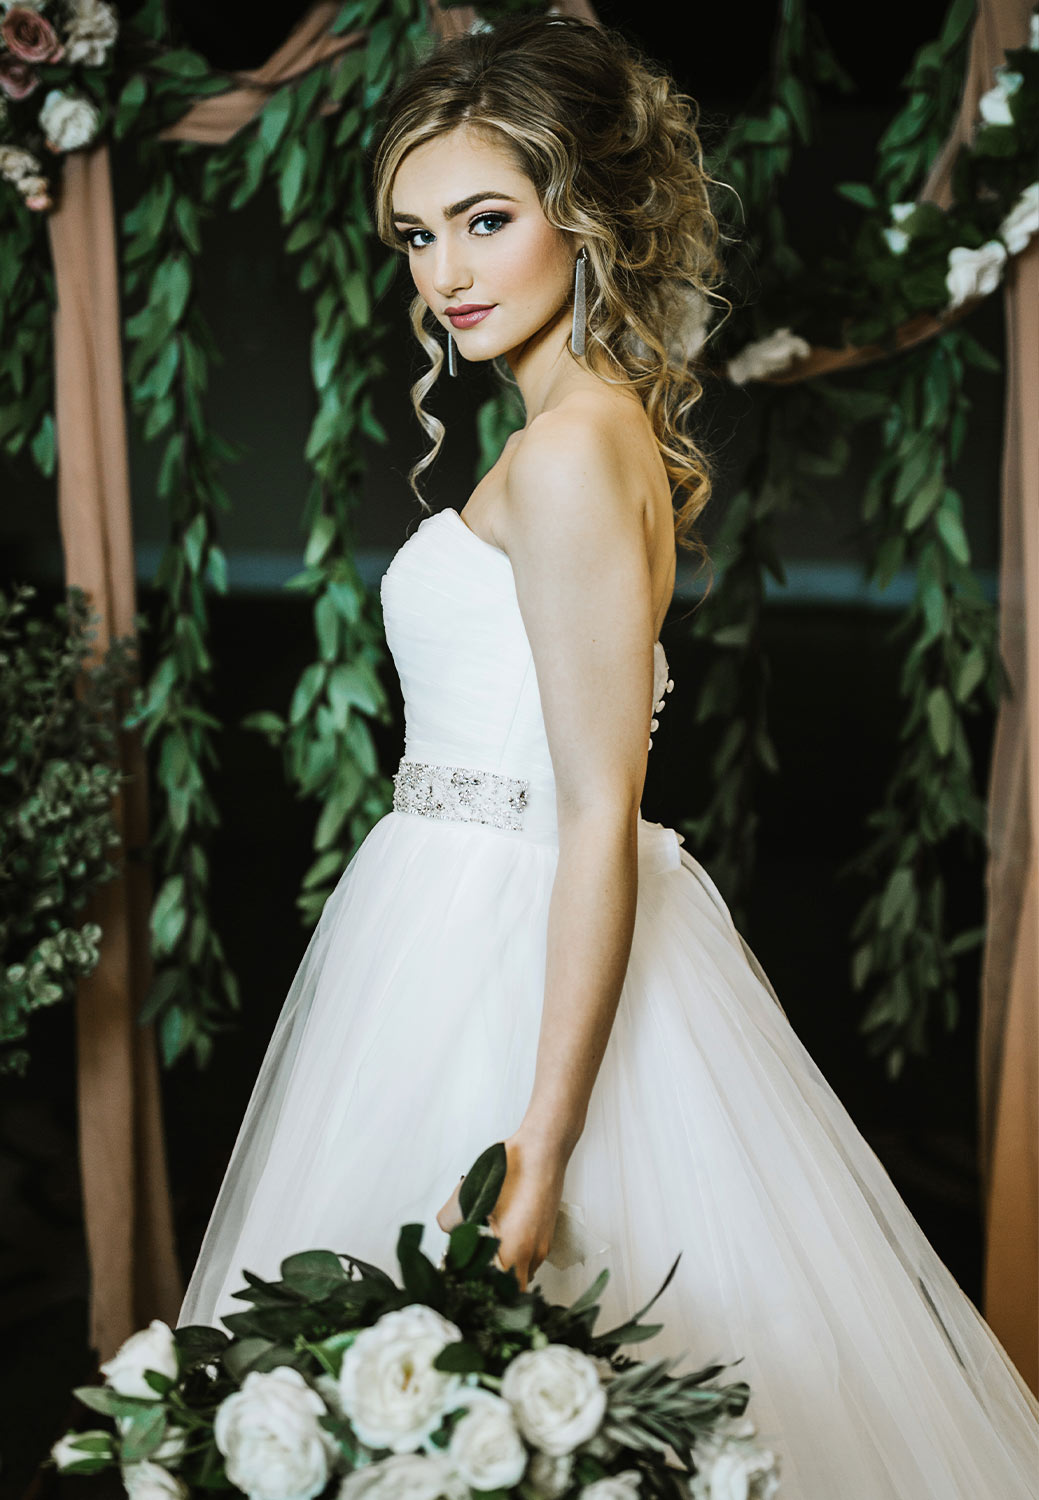 a young bride in a straight neckline gown poses for a wedding photo while holding a large bouquet and standing against a background of leaves and drapery